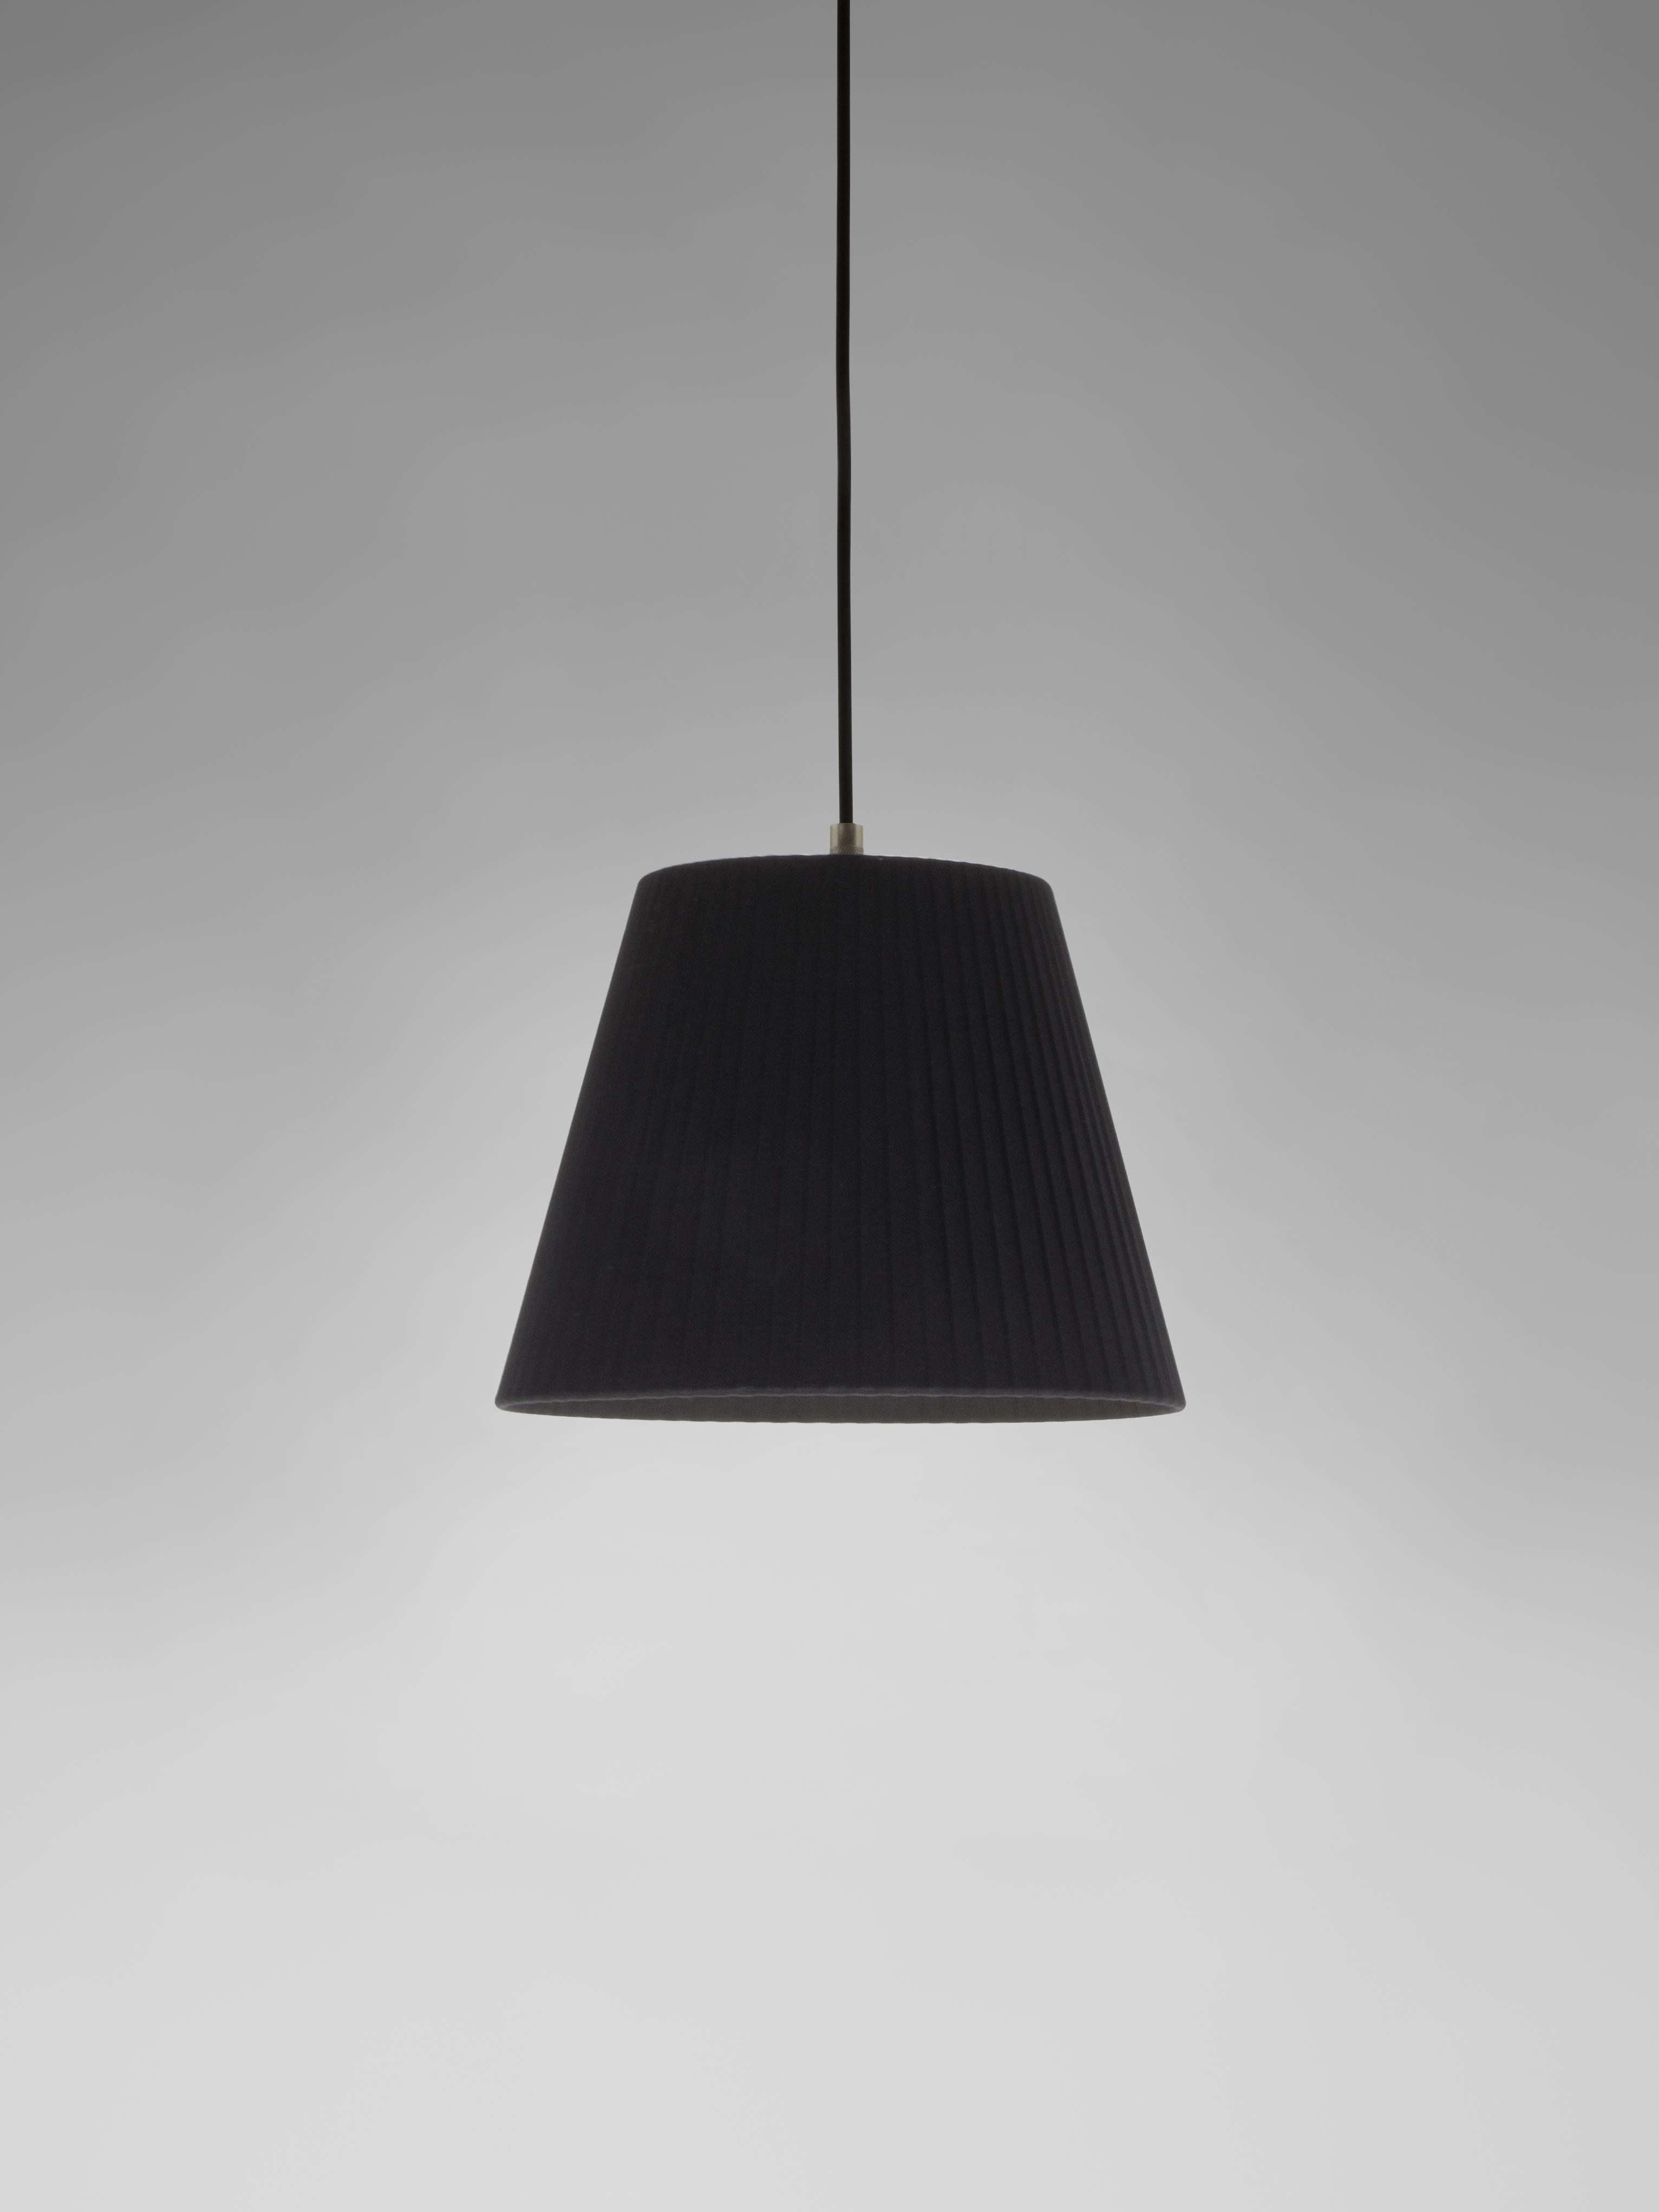 Black sísísí cónicas MT1 pendant lamp by Santa & Cole
Dimensions: D 25 x H 20 cm
Materials: Metal, ribbon.
Available in other colors.

The conical shape group has multiple finishes and sizes. It consists of four sizes: PT1, MT1, GT1 and GT3,